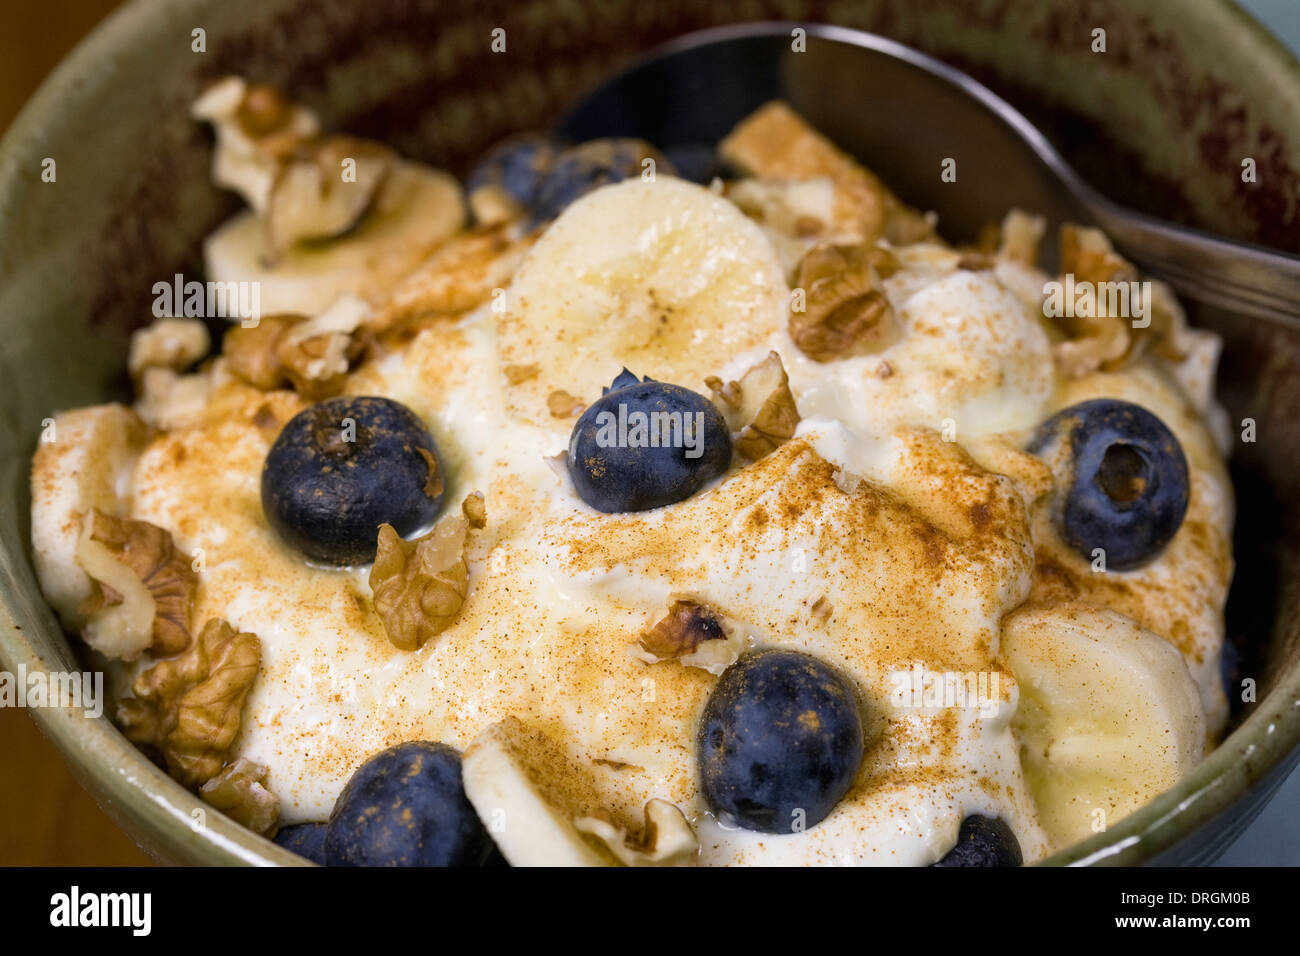 A healthy breakfast. Yogurt with banana, blueberries, walnuts and a sprinkling of cinnamon. Stock Photo